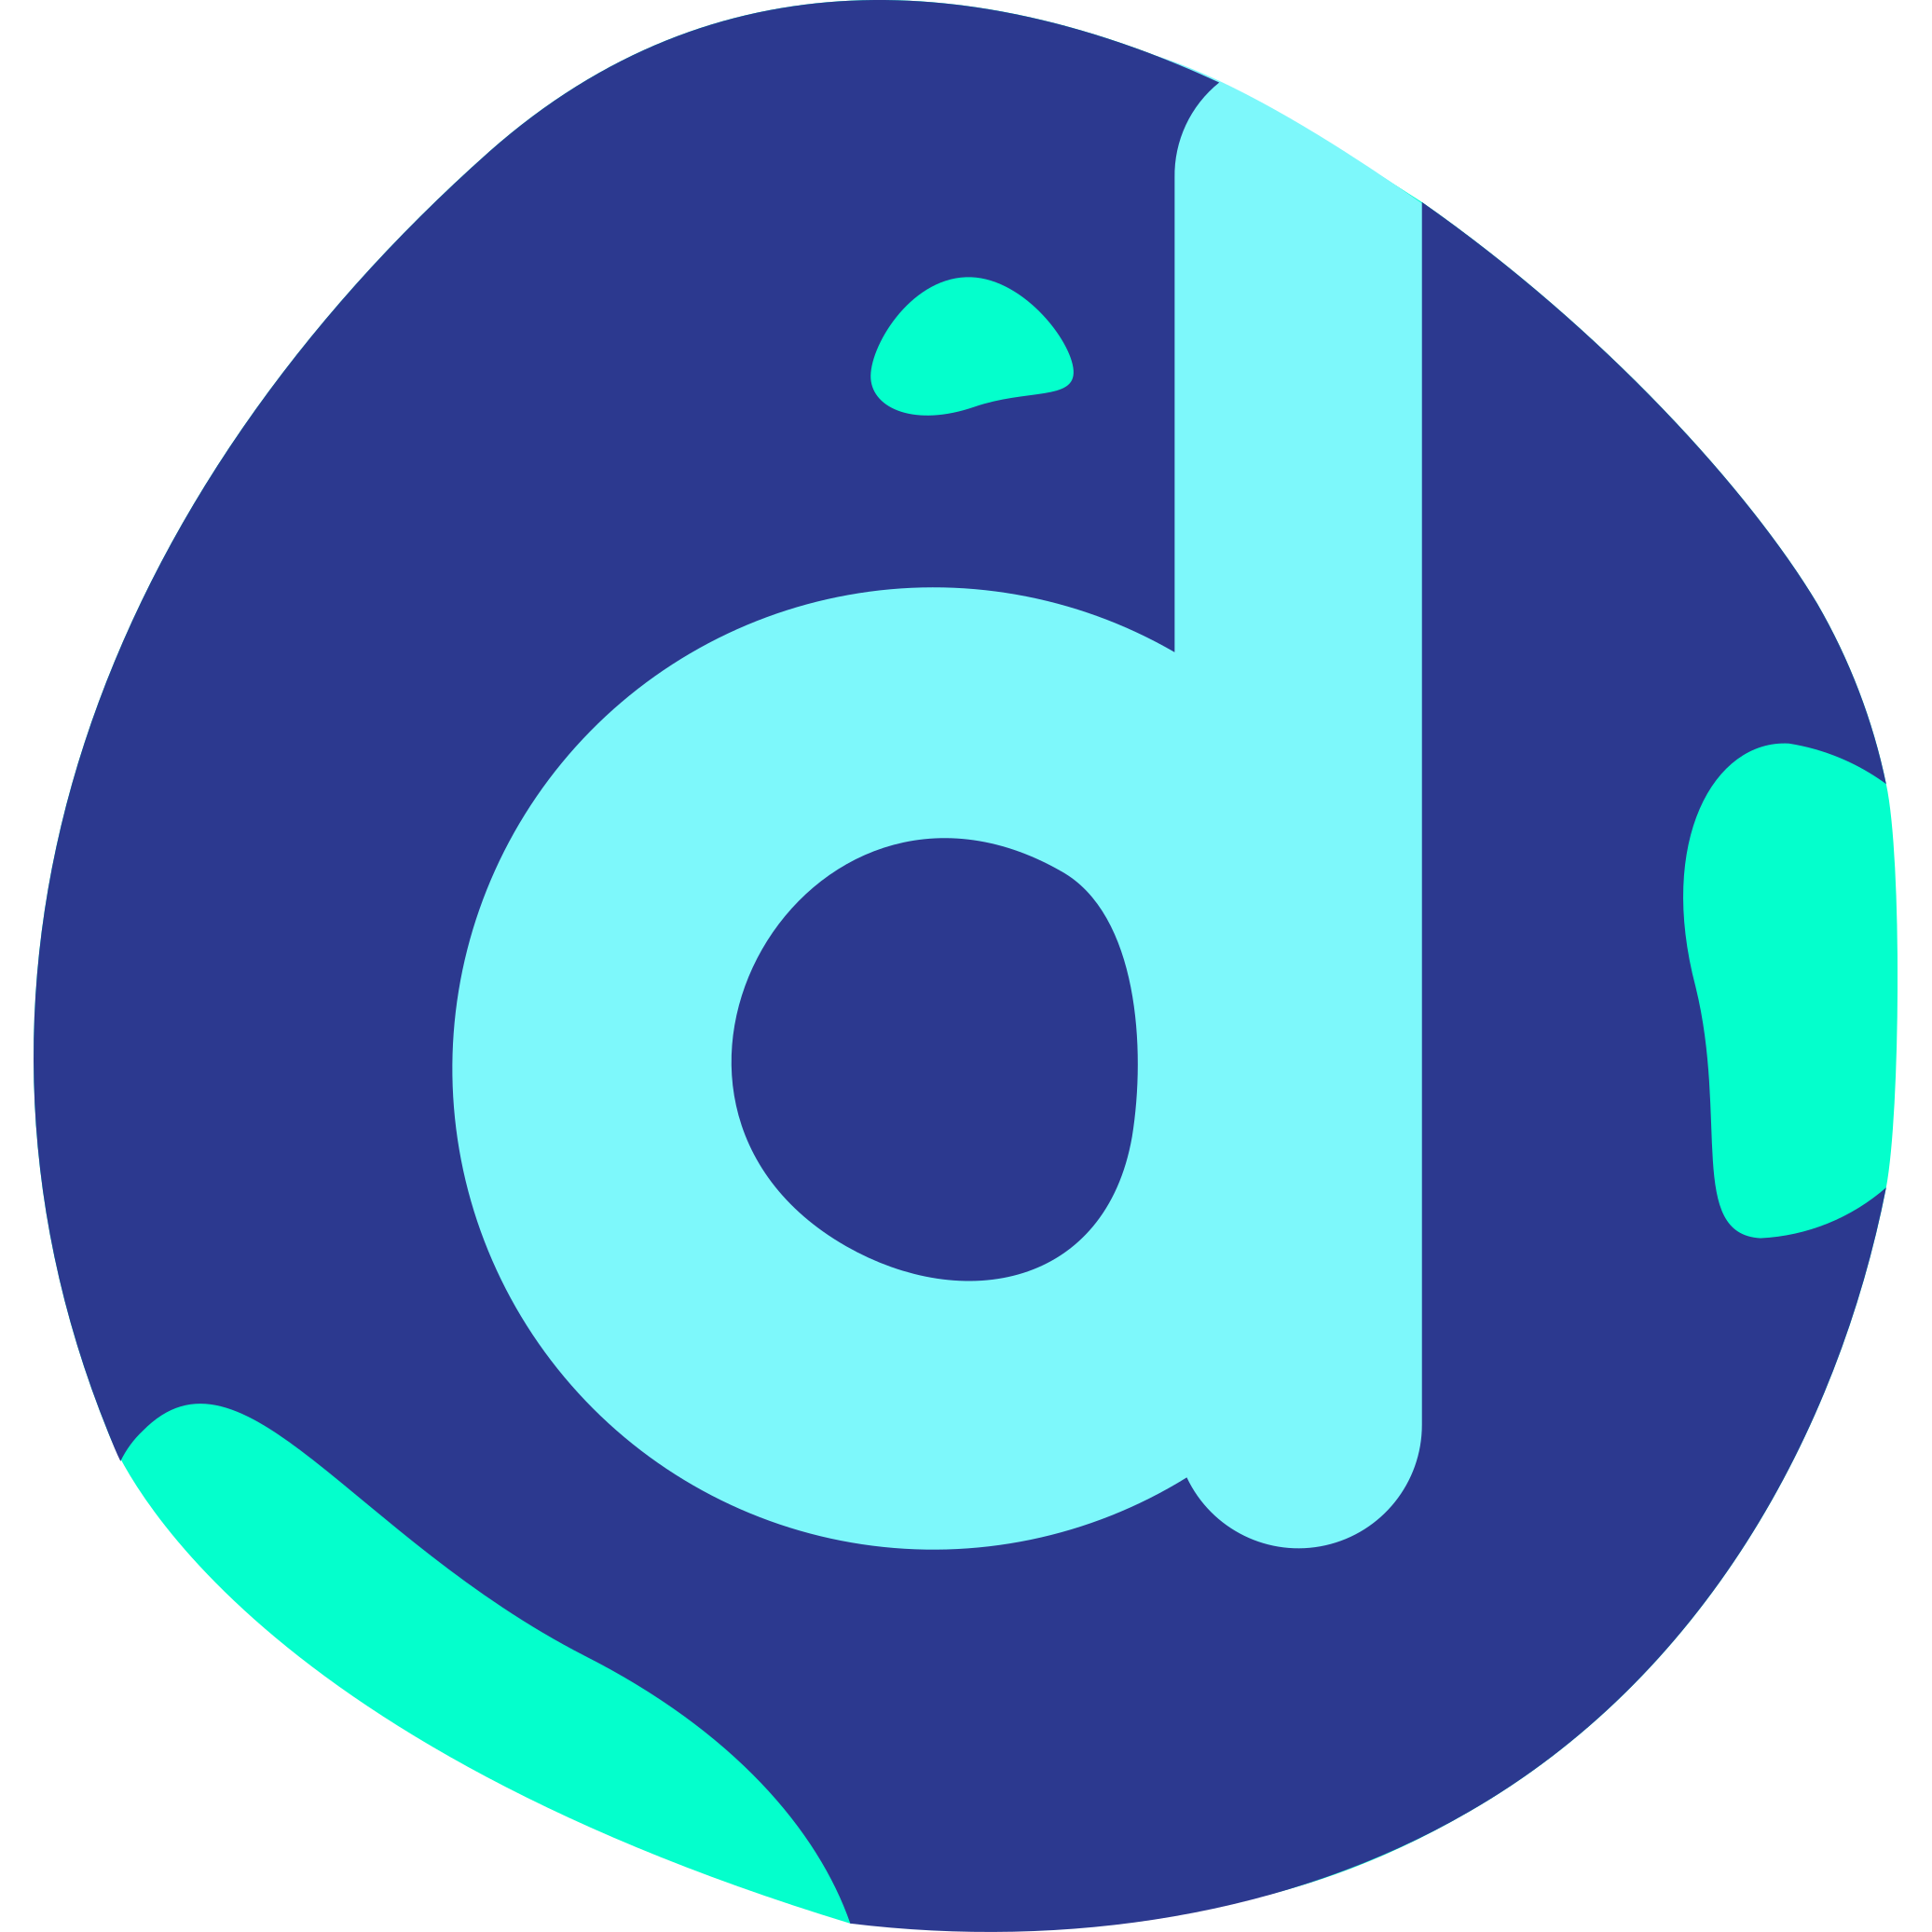 district0x (DNT) Logo .SVG and .PNG Files Download